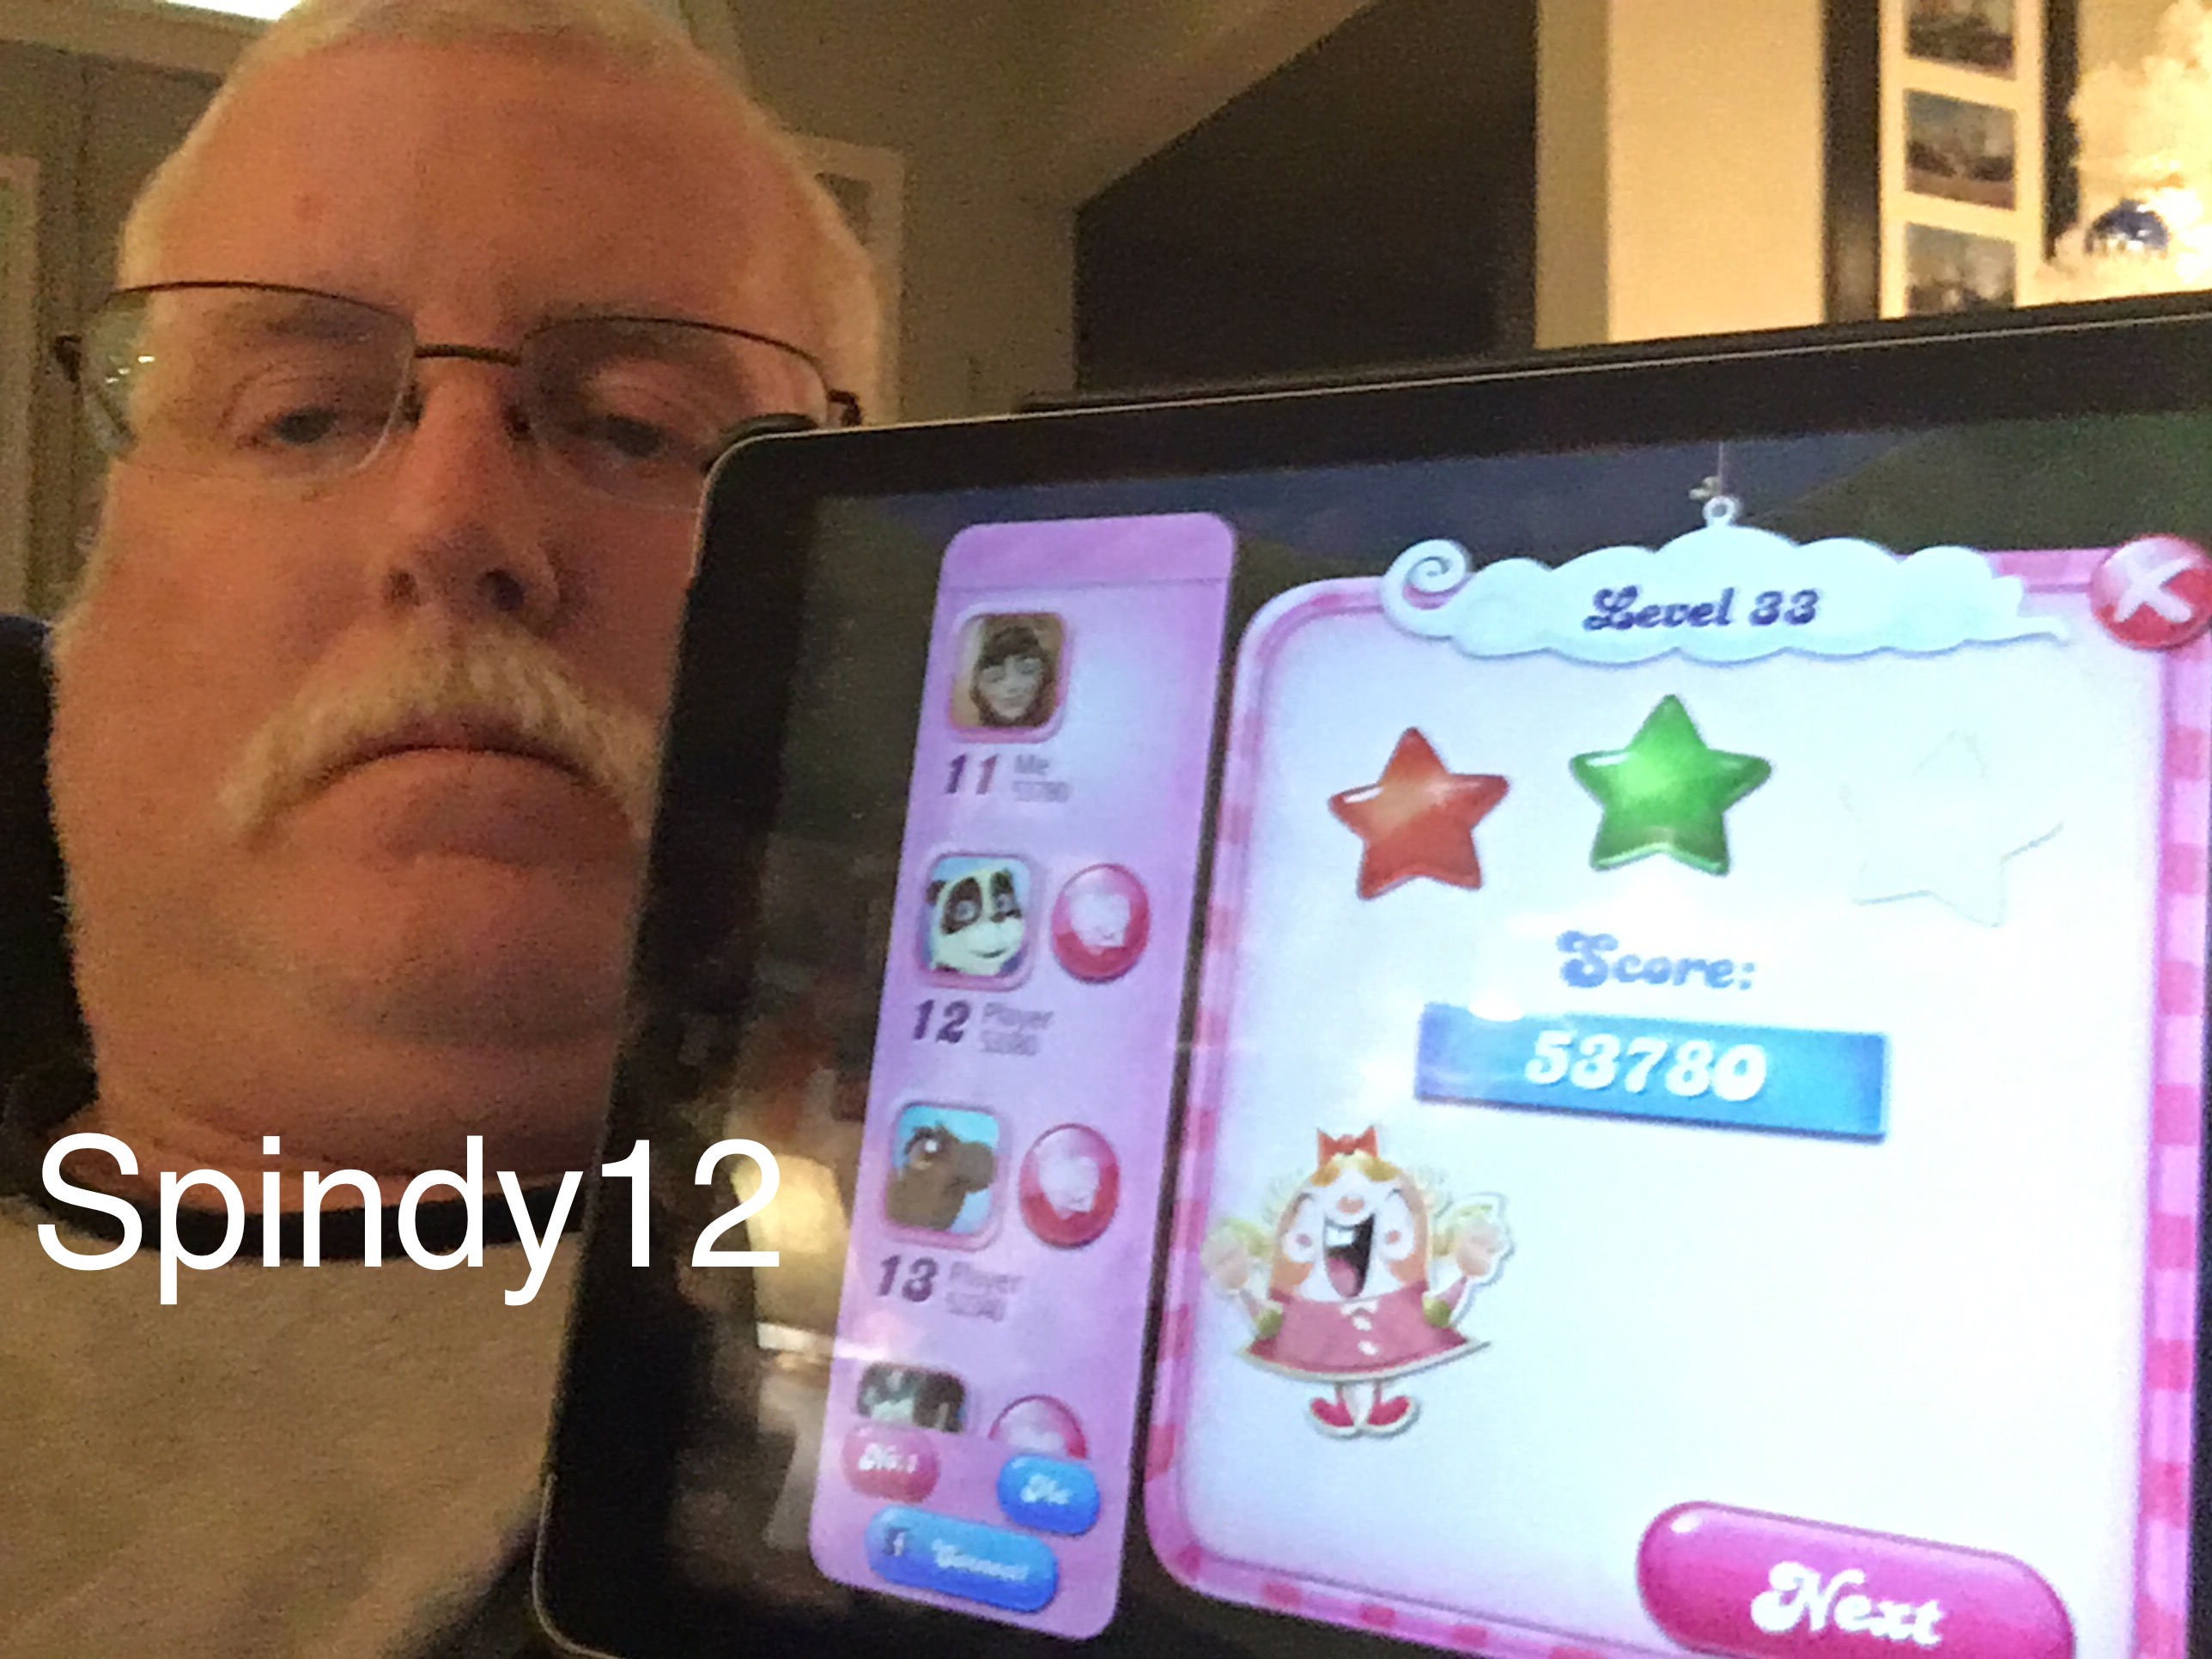 Spindy12: Candy Crush Saga: Level 033 (iOS) 53,780 points on 2016-12-21 17:40:40